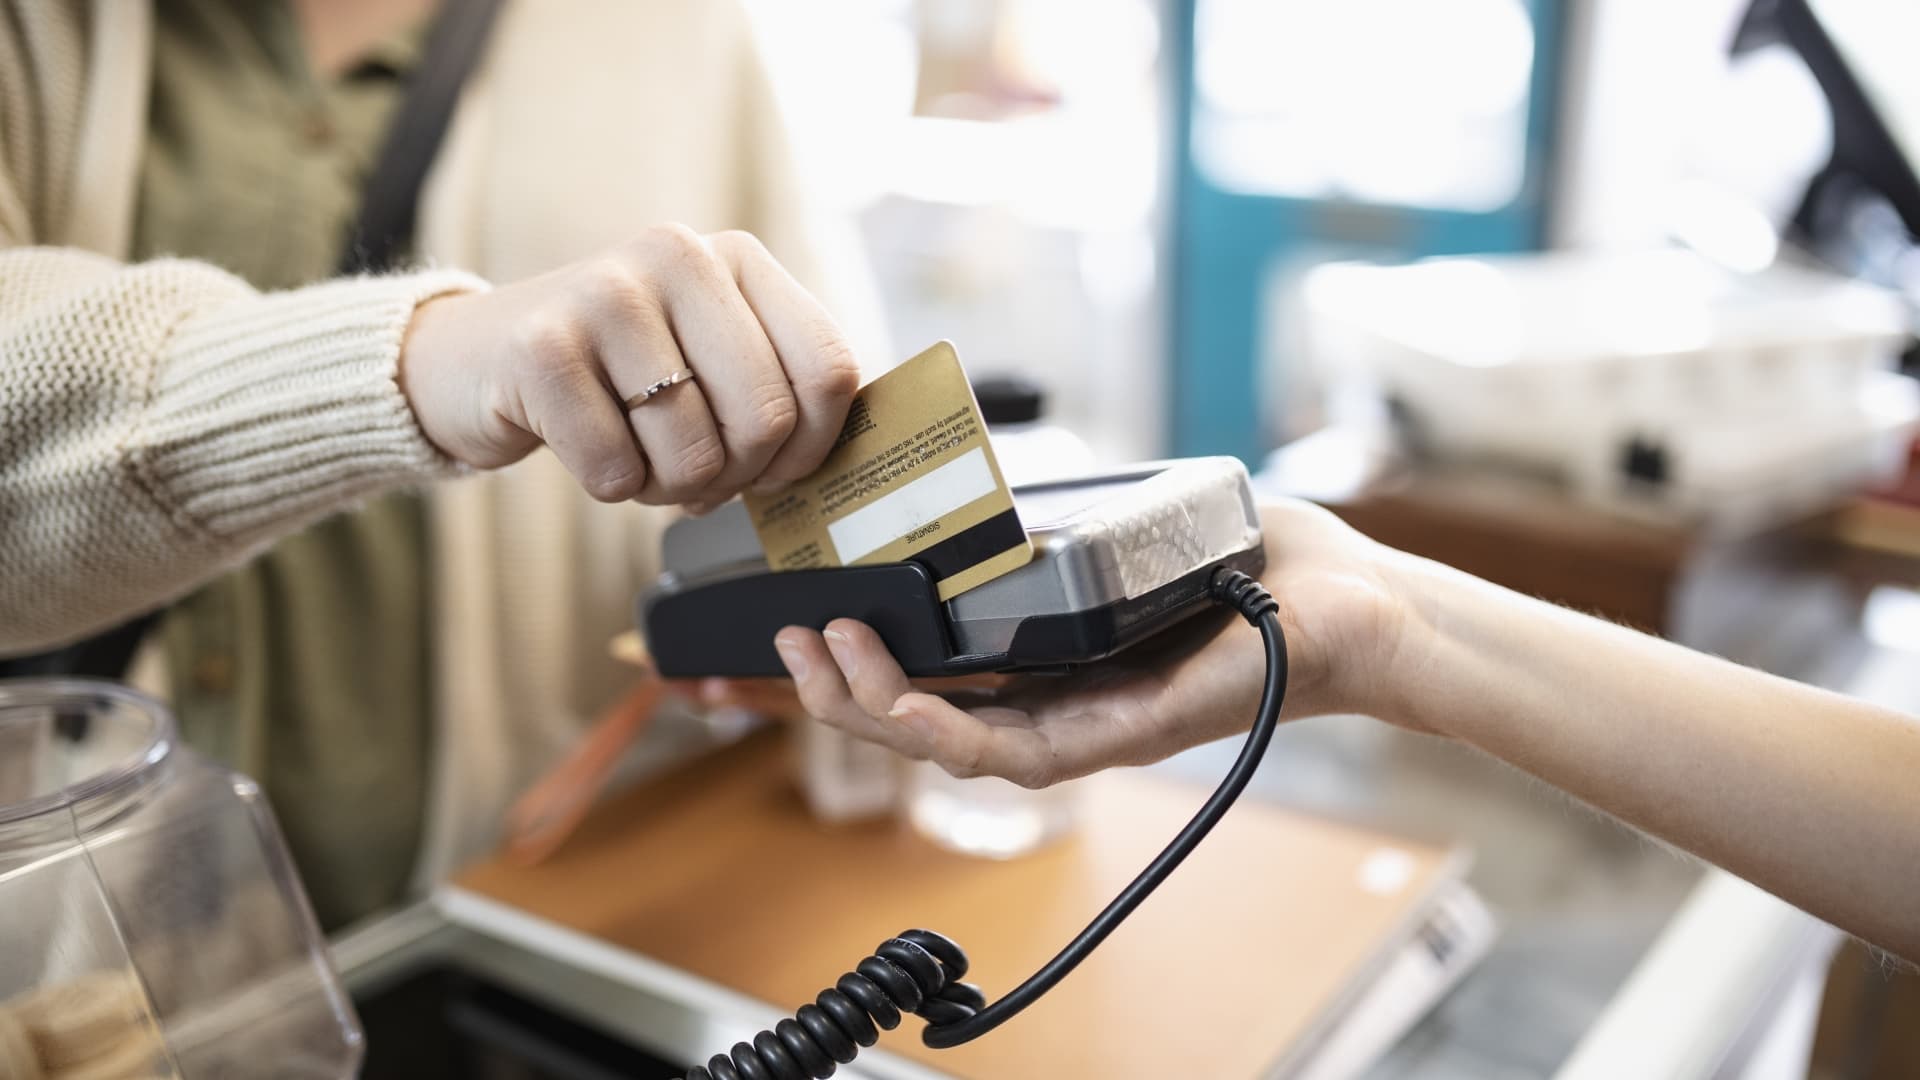 Americans have $1.13 trillion in credit card debt. Here are some expert tips to help pay yours off